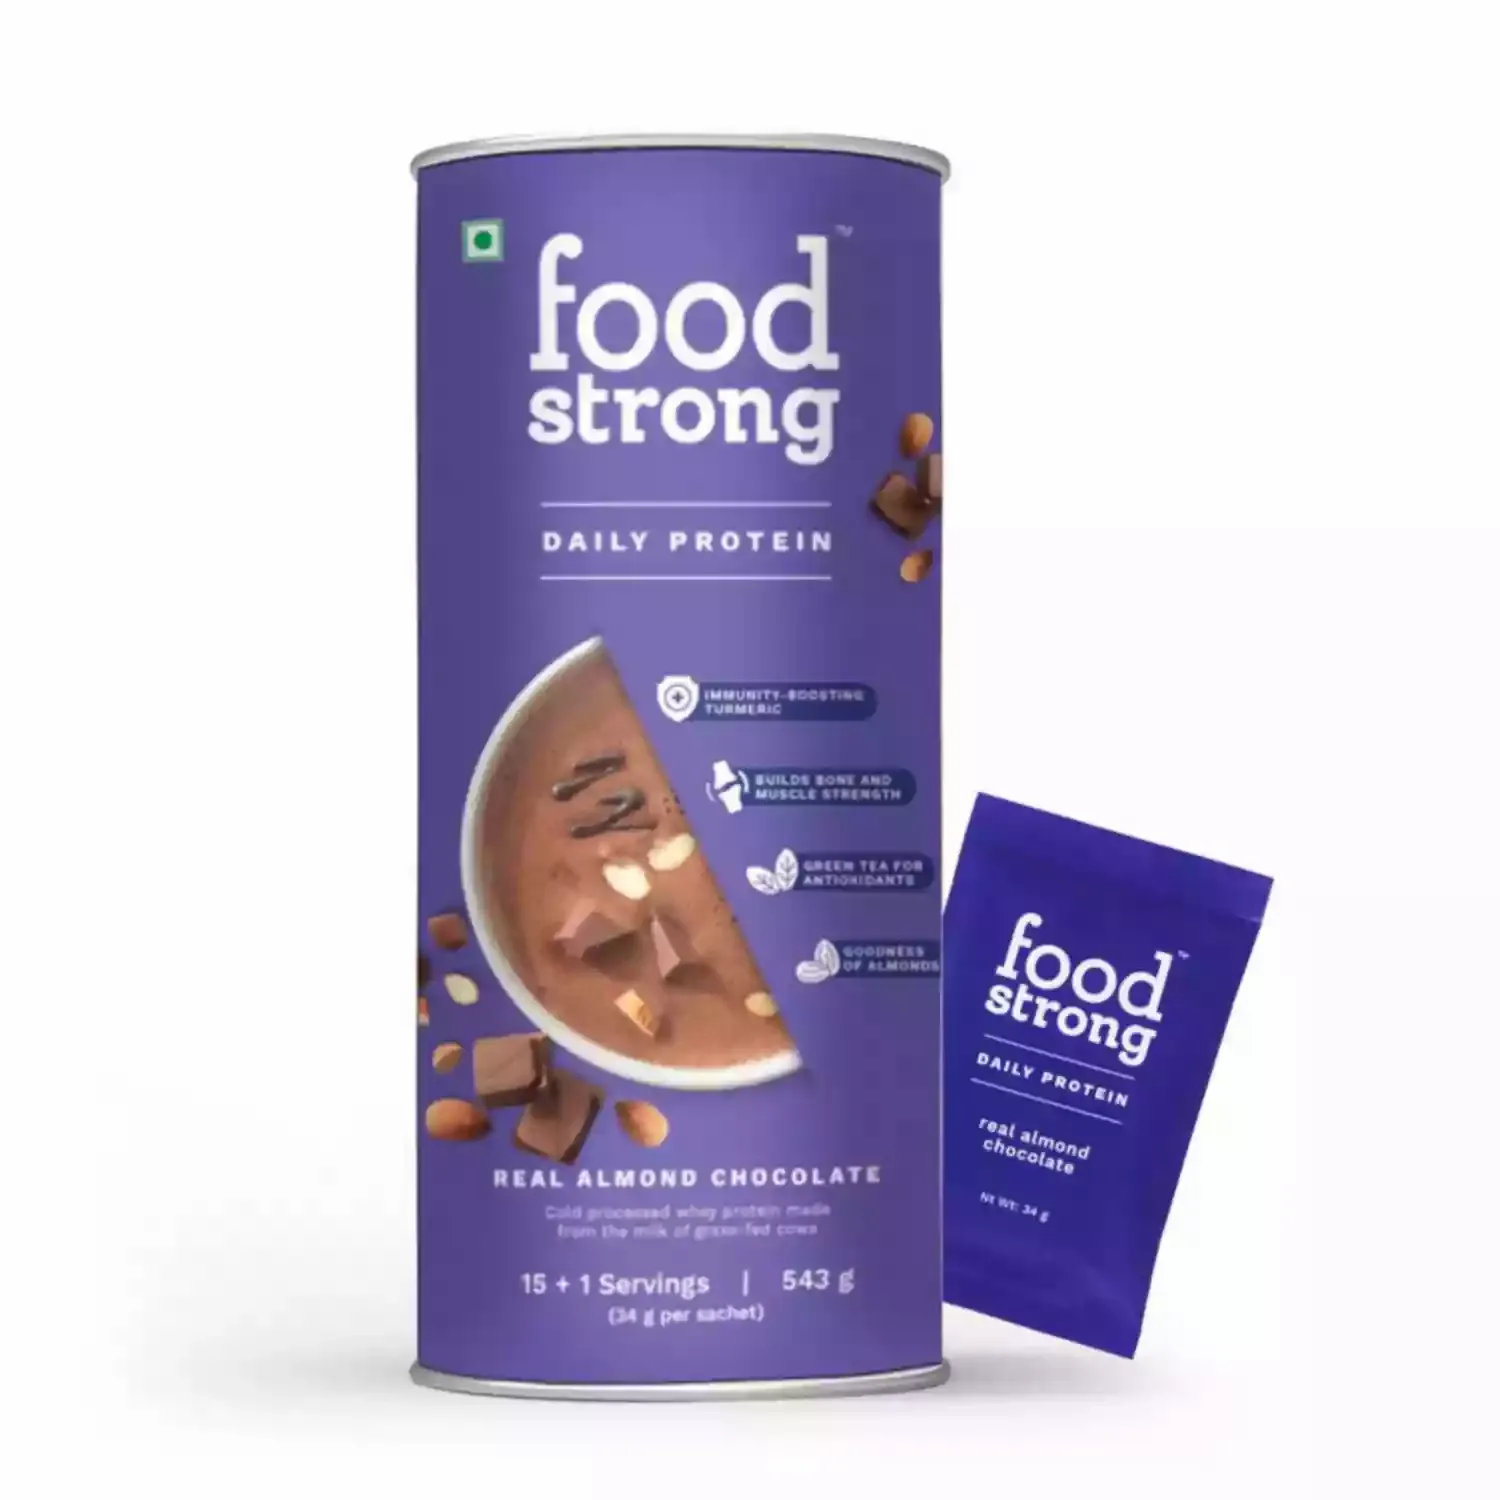 Foodstrong Daily Protein Real Almond Chocolate (534 gms)